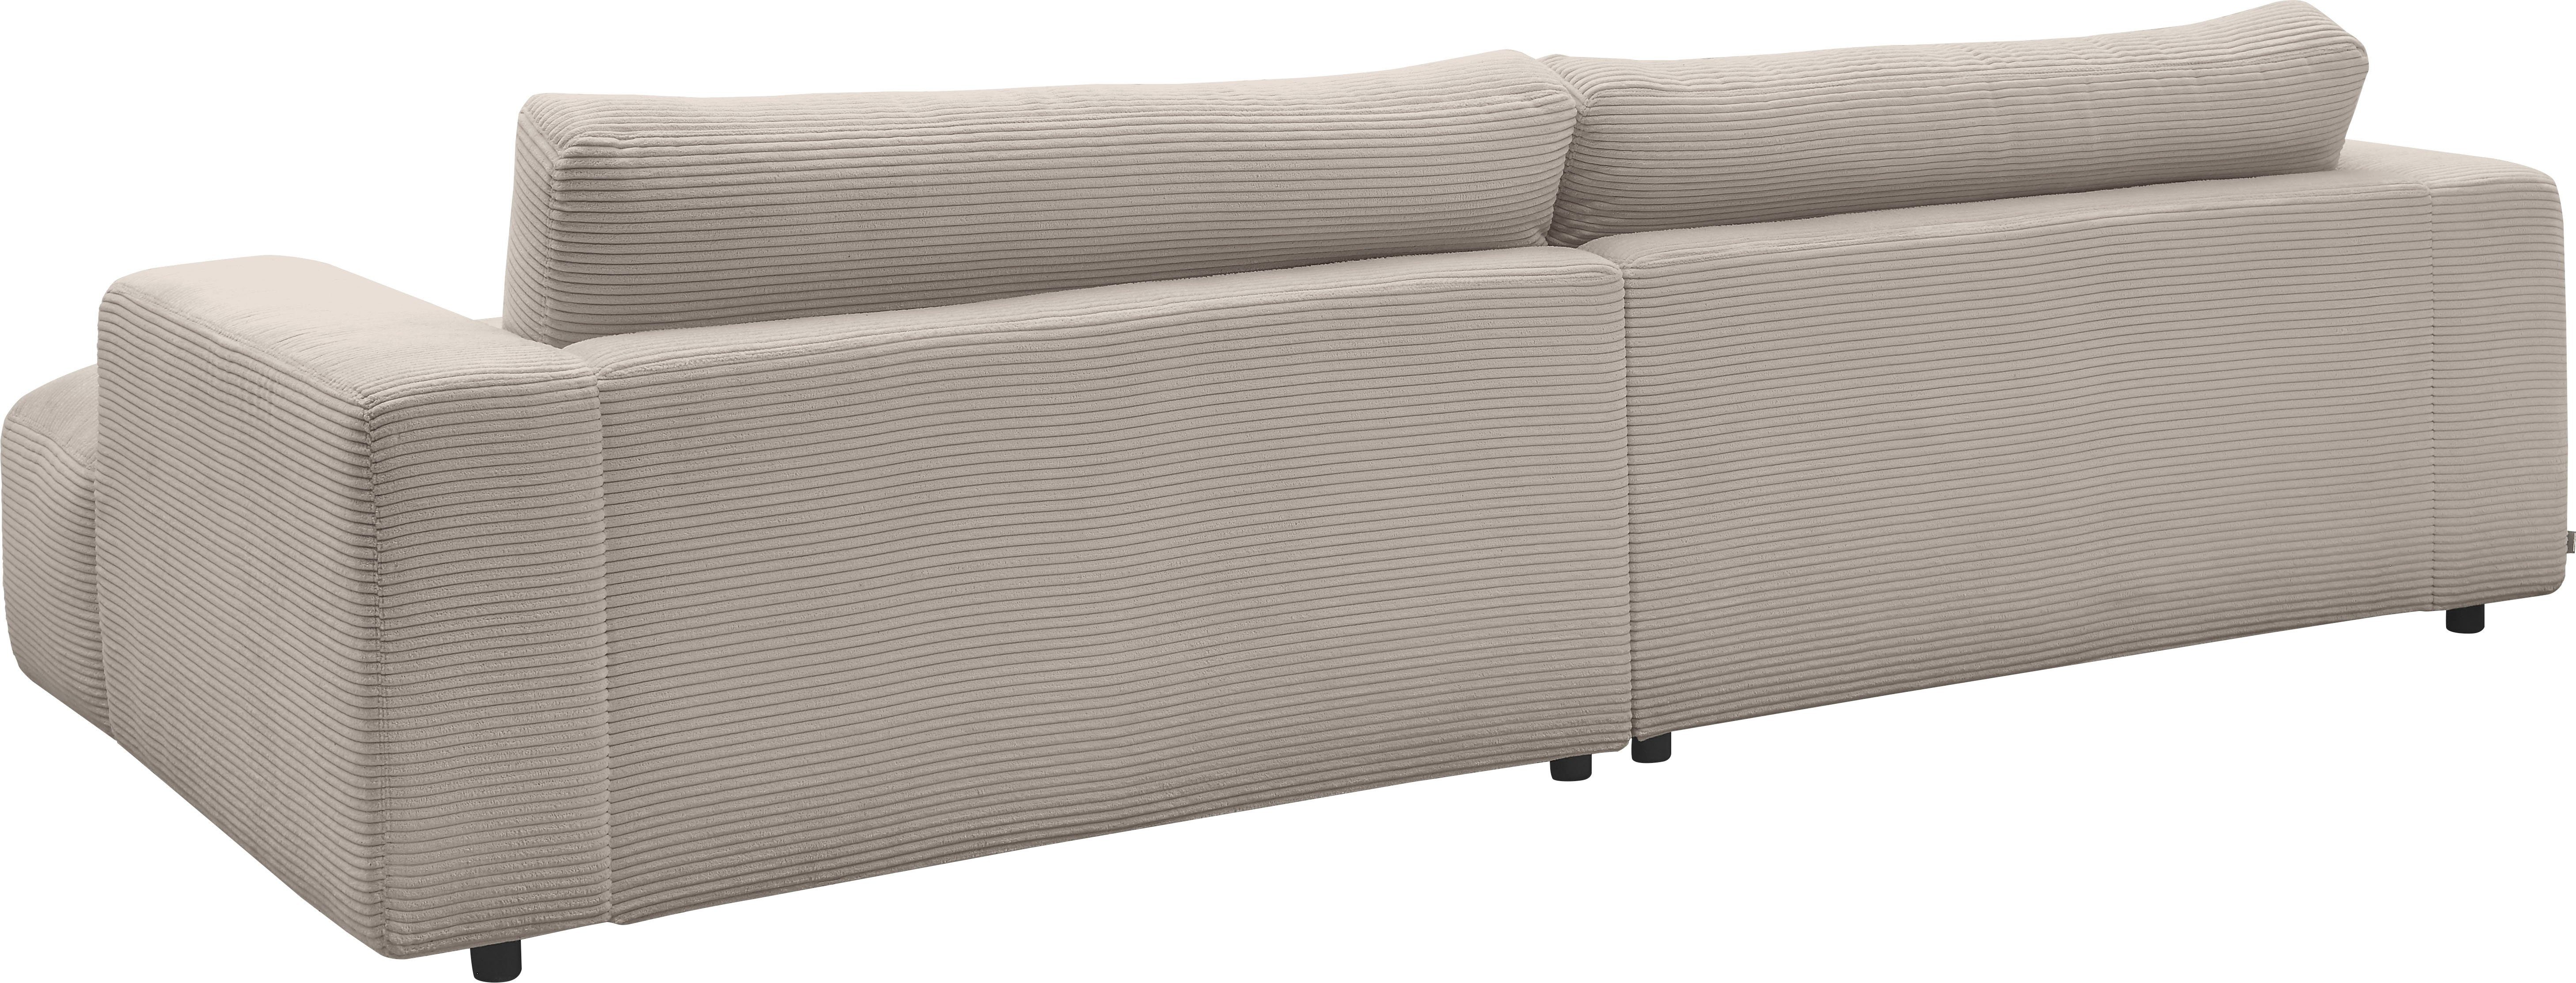 GALLERY M branded by Musterring light-grey cm Cord-Bezug, 292 Breite Lucia, Loungesofa